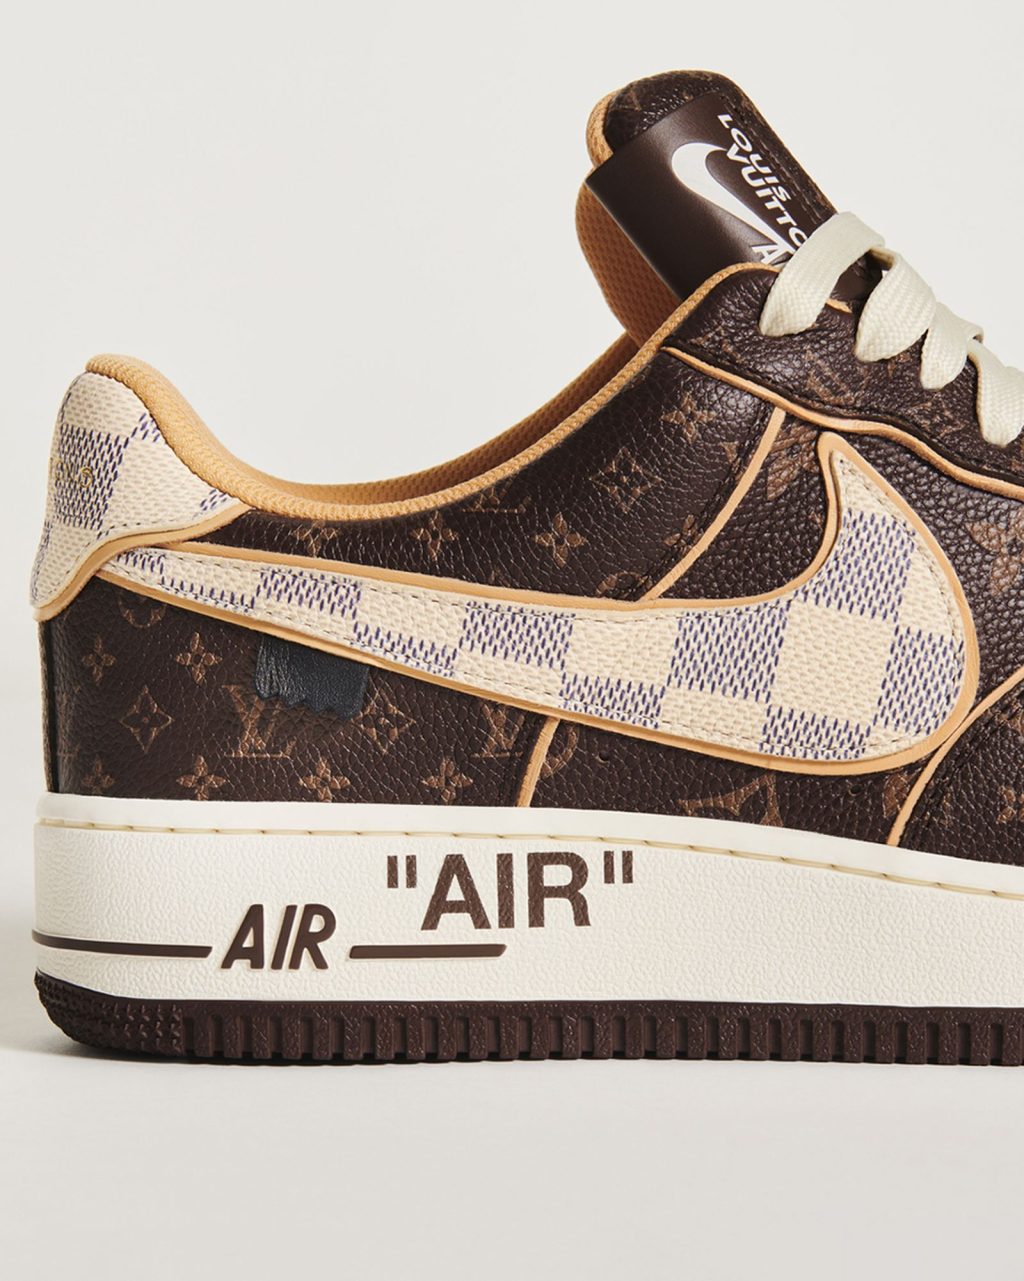 Look! This Louis Vuitton x Nike Air Force 1 costs P3.5 Million